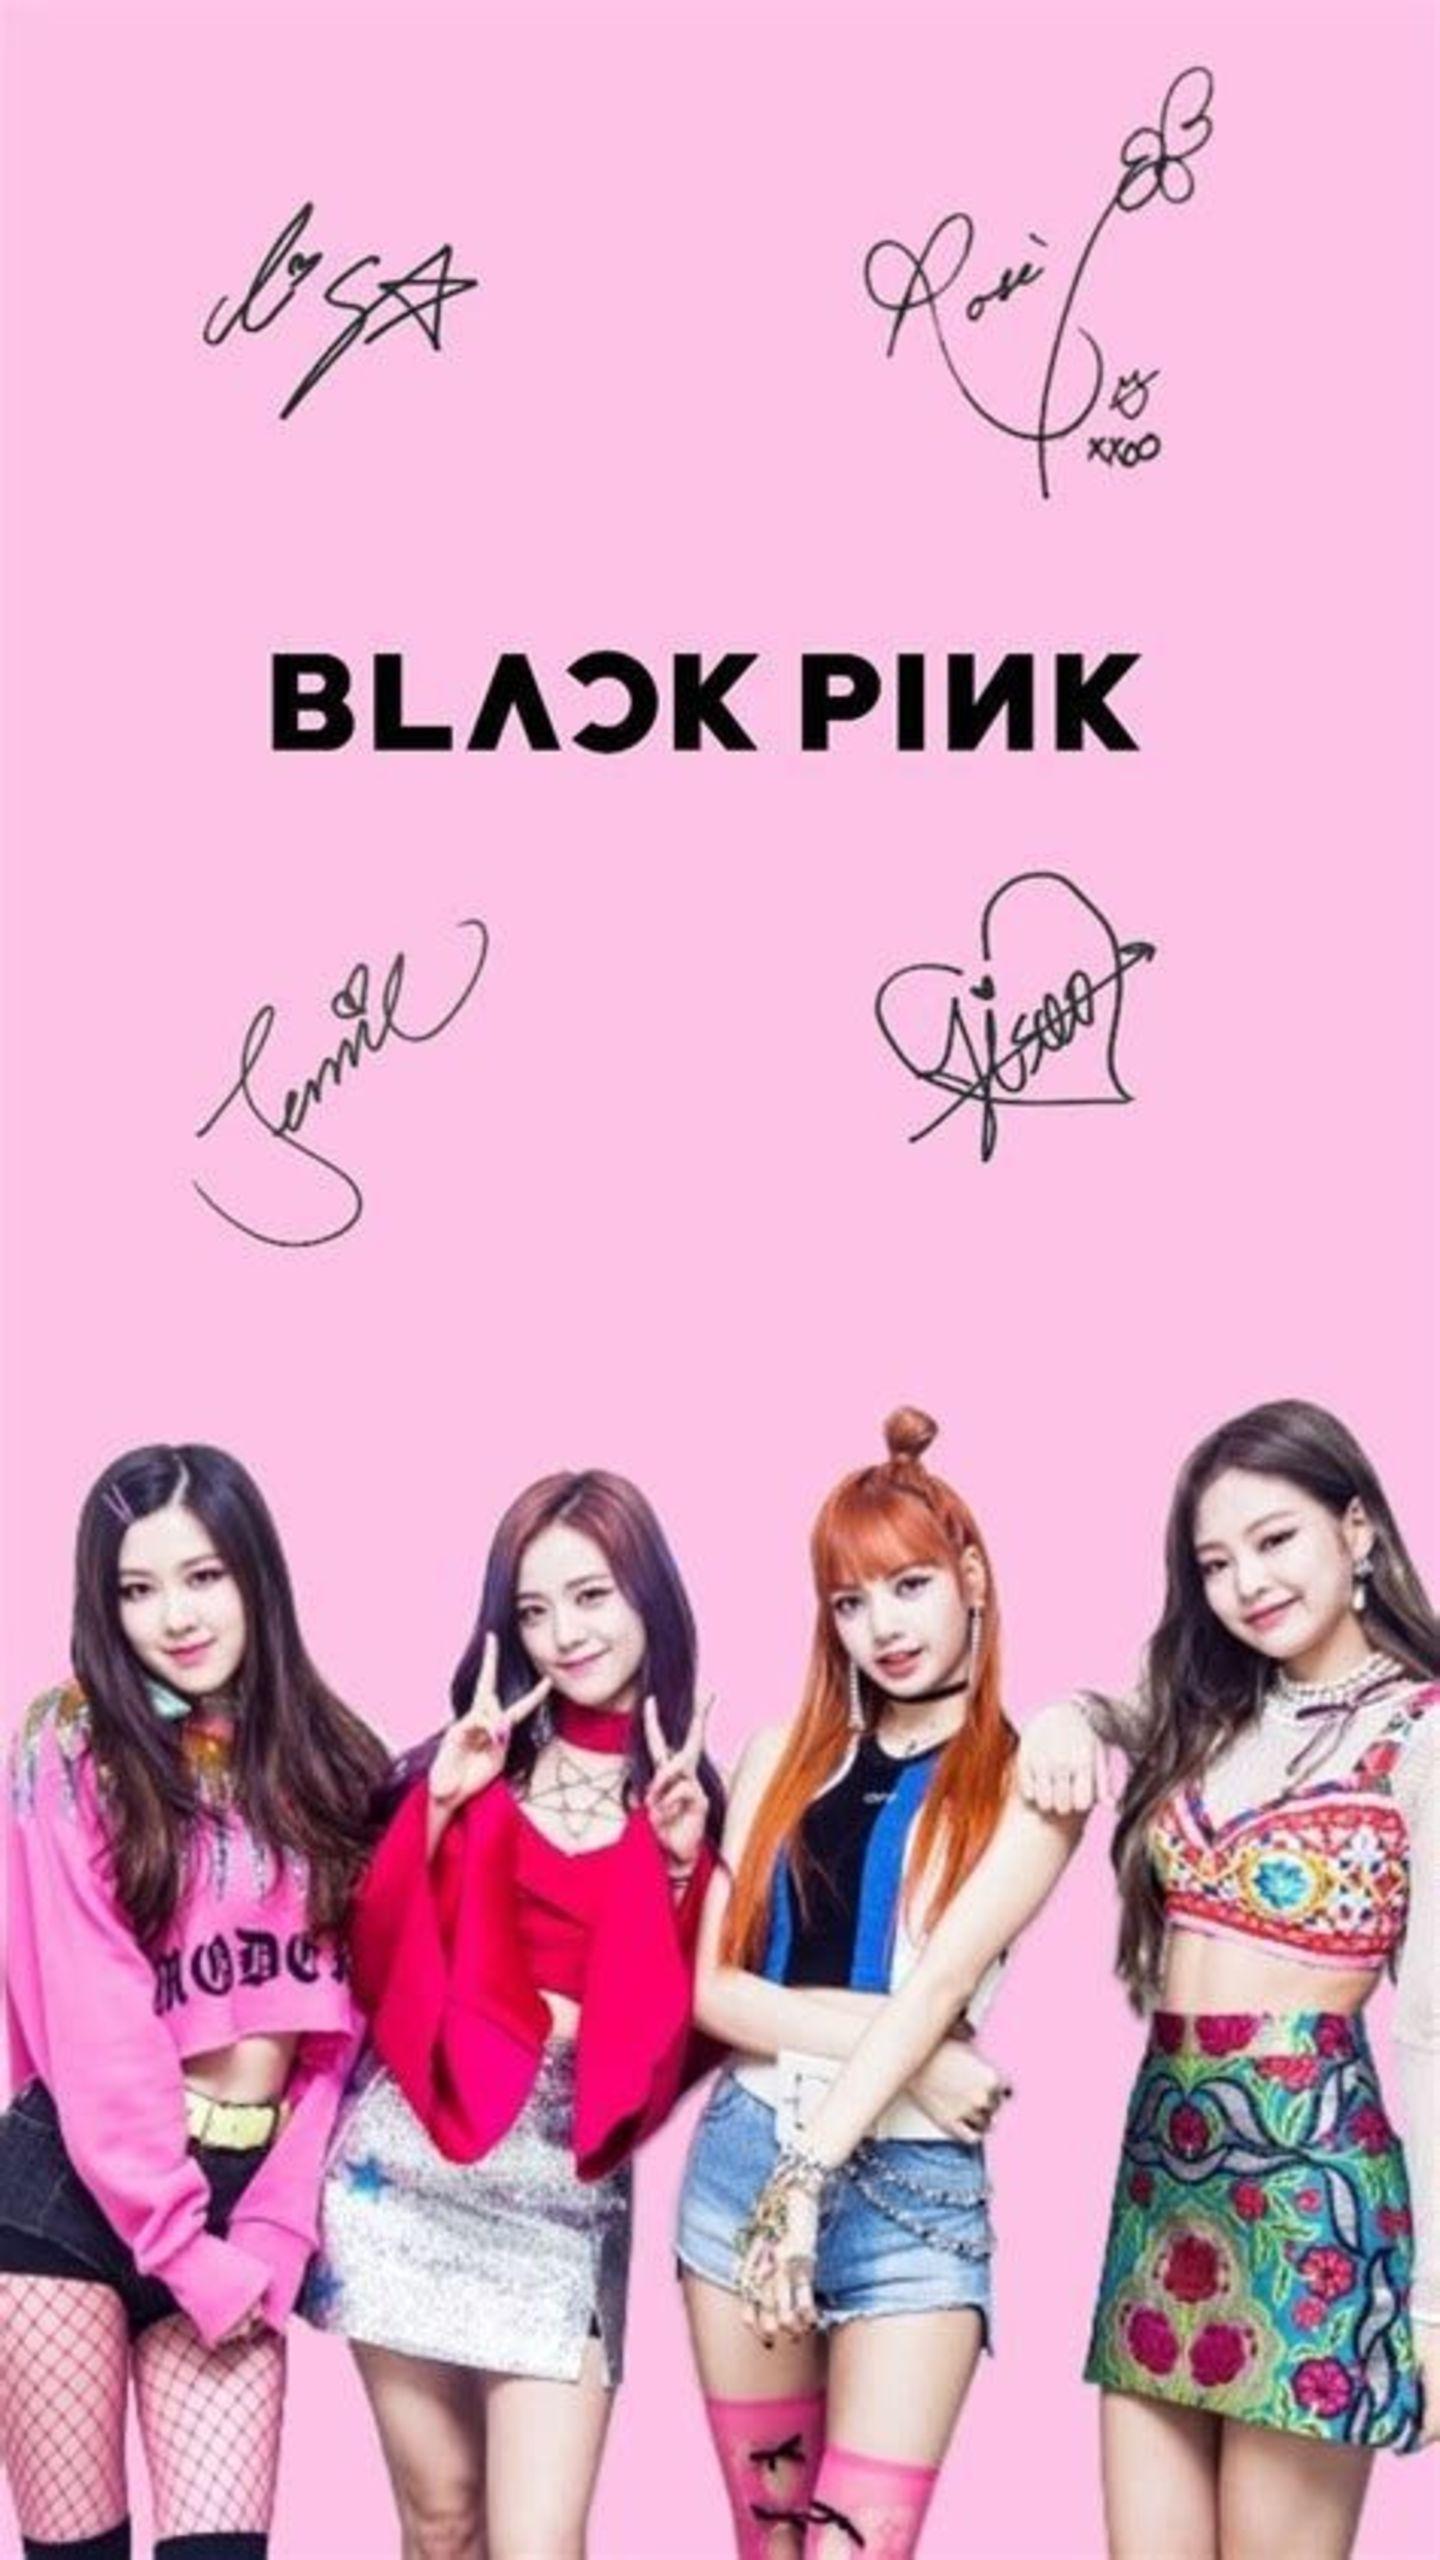 Blackpink Wallpaper 2021 HD 4K for Android